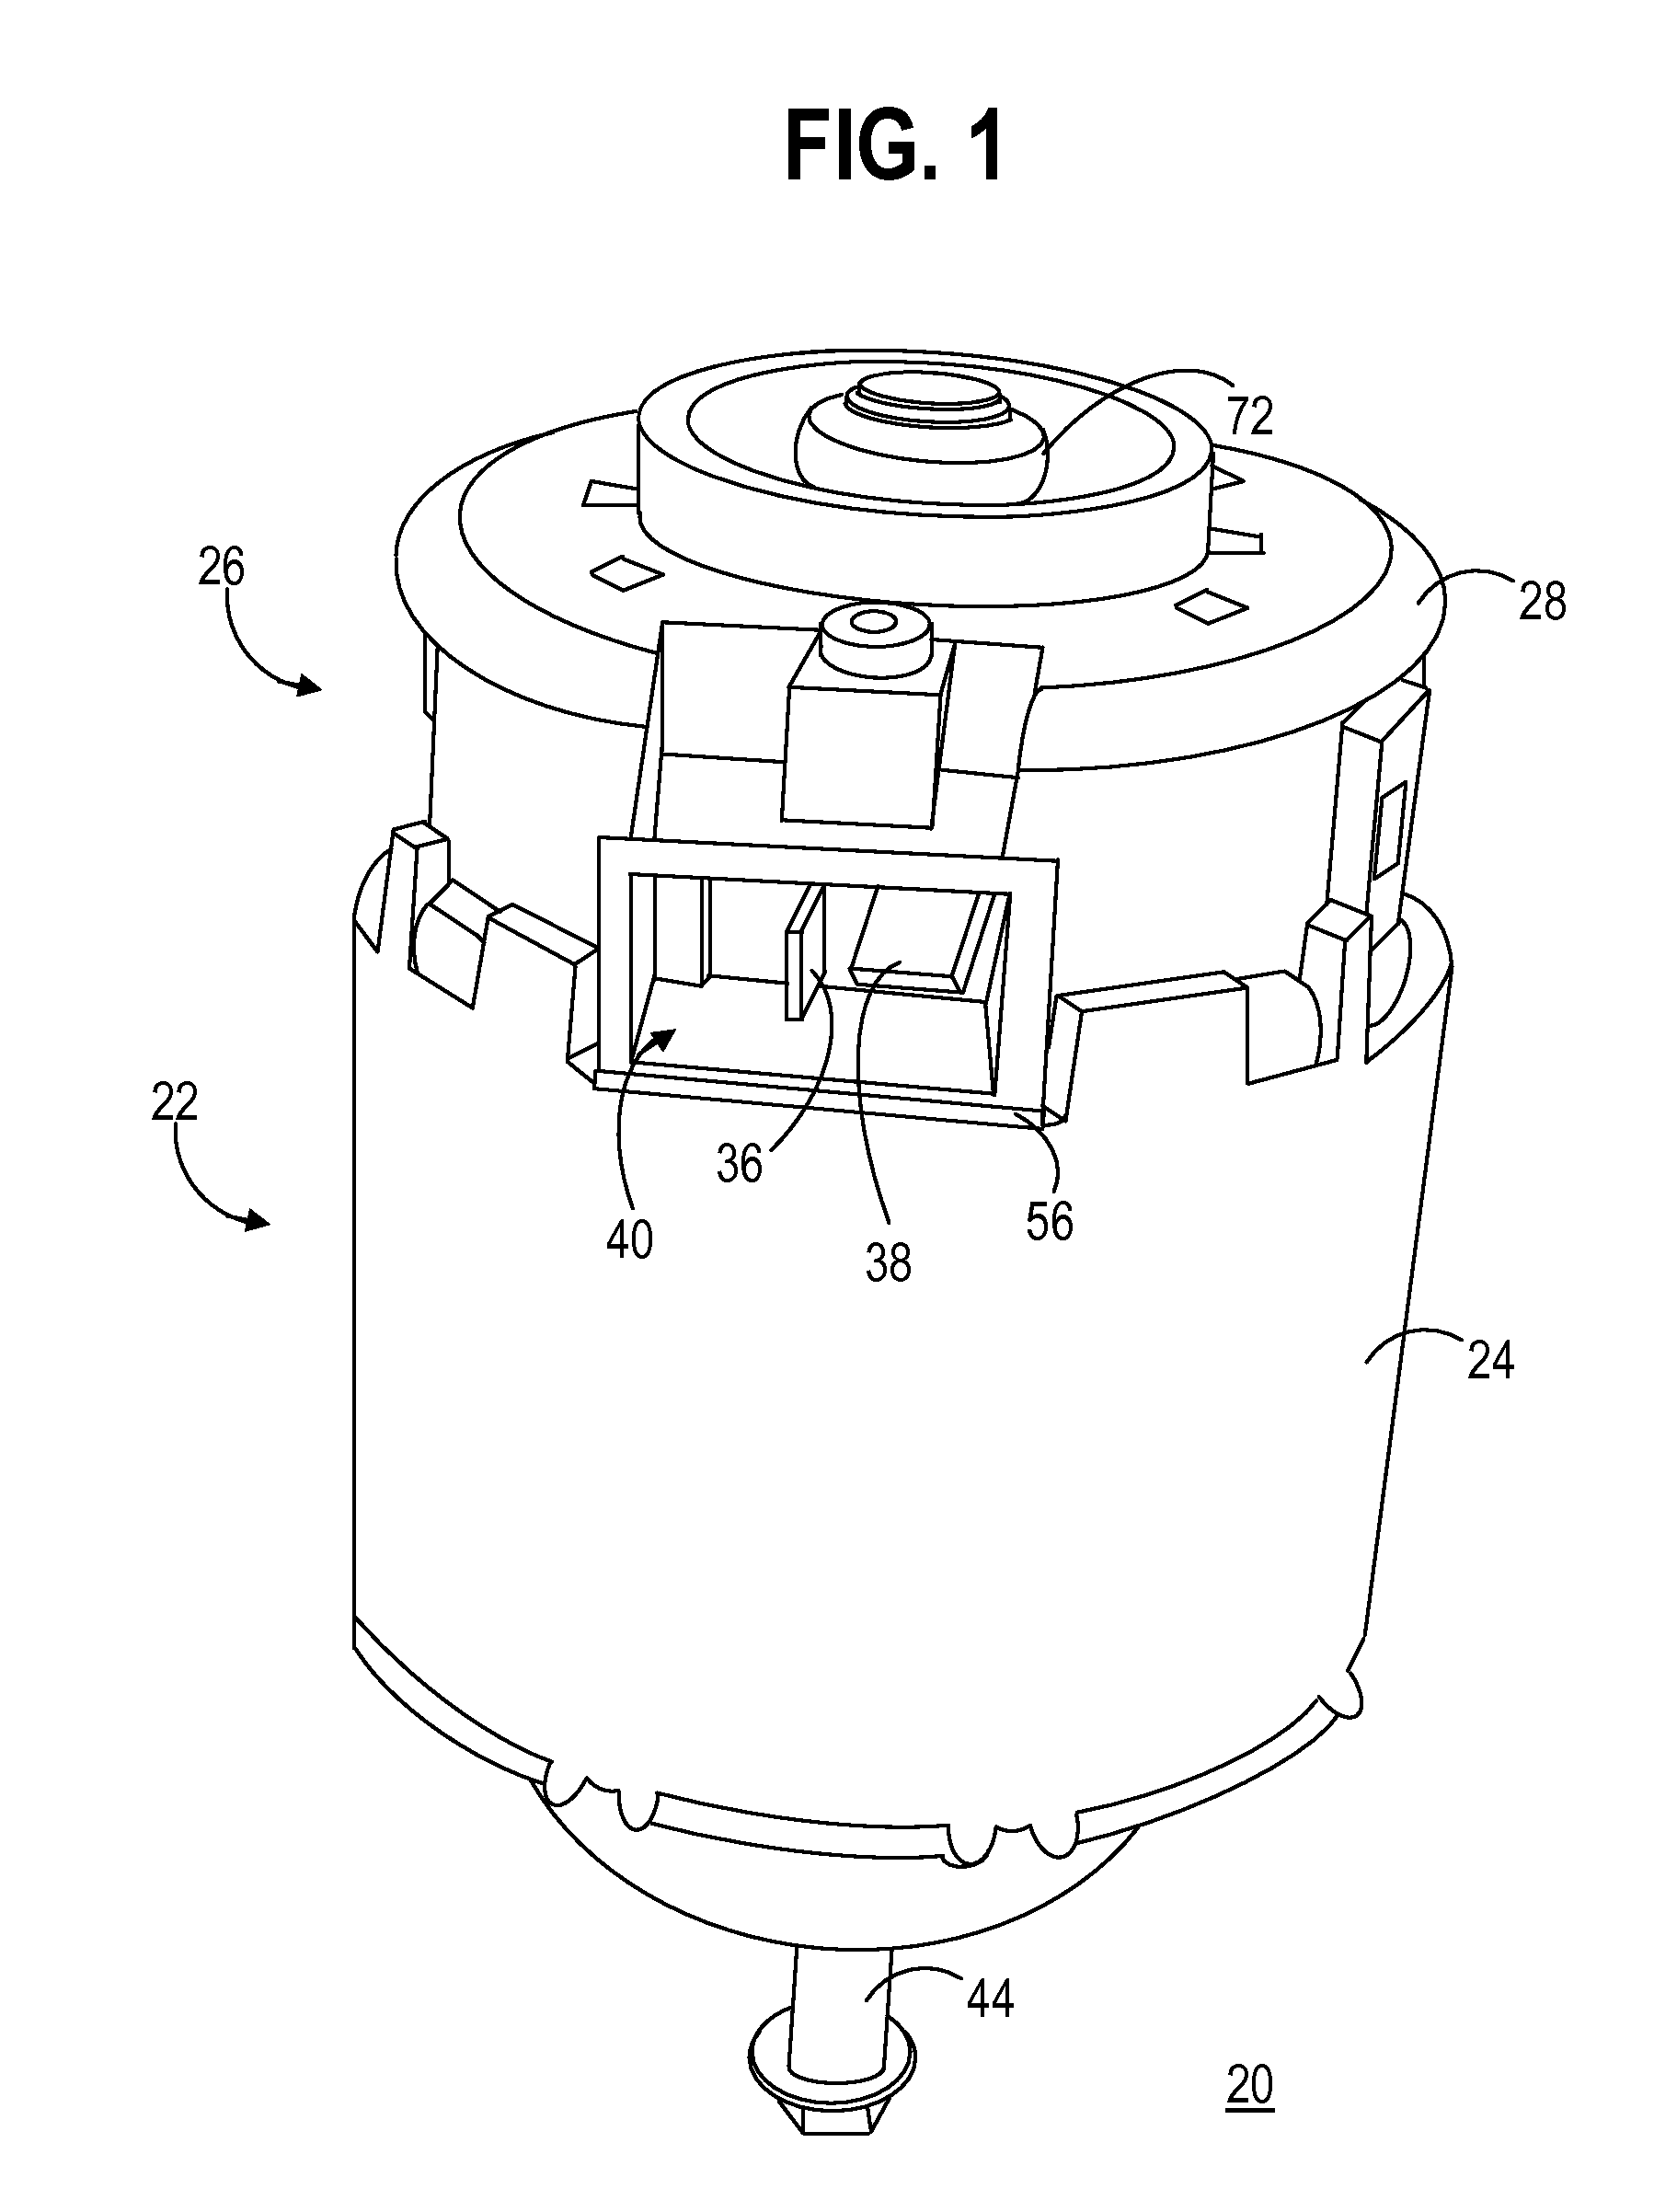 Motor assembly incorporating a securely positioned electromagnetic disturubance suppression device